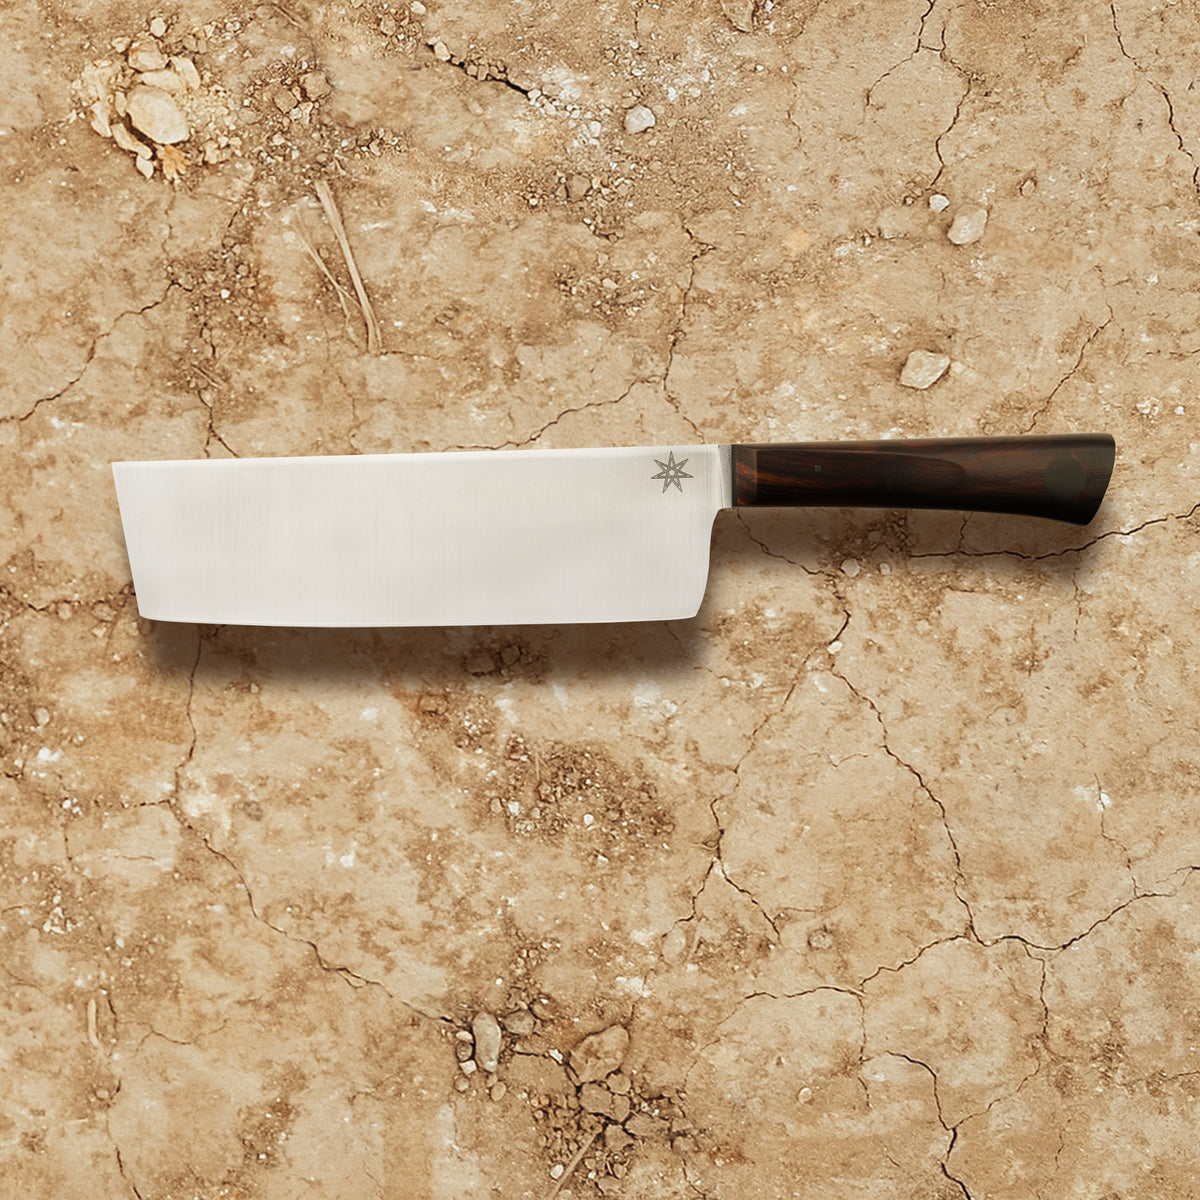 Our Olneya Nakiri knife is a lux kitchen knife made with a real wood handle. This vegetable knife has a tall, square blade, to help with thin, straight cuts. 